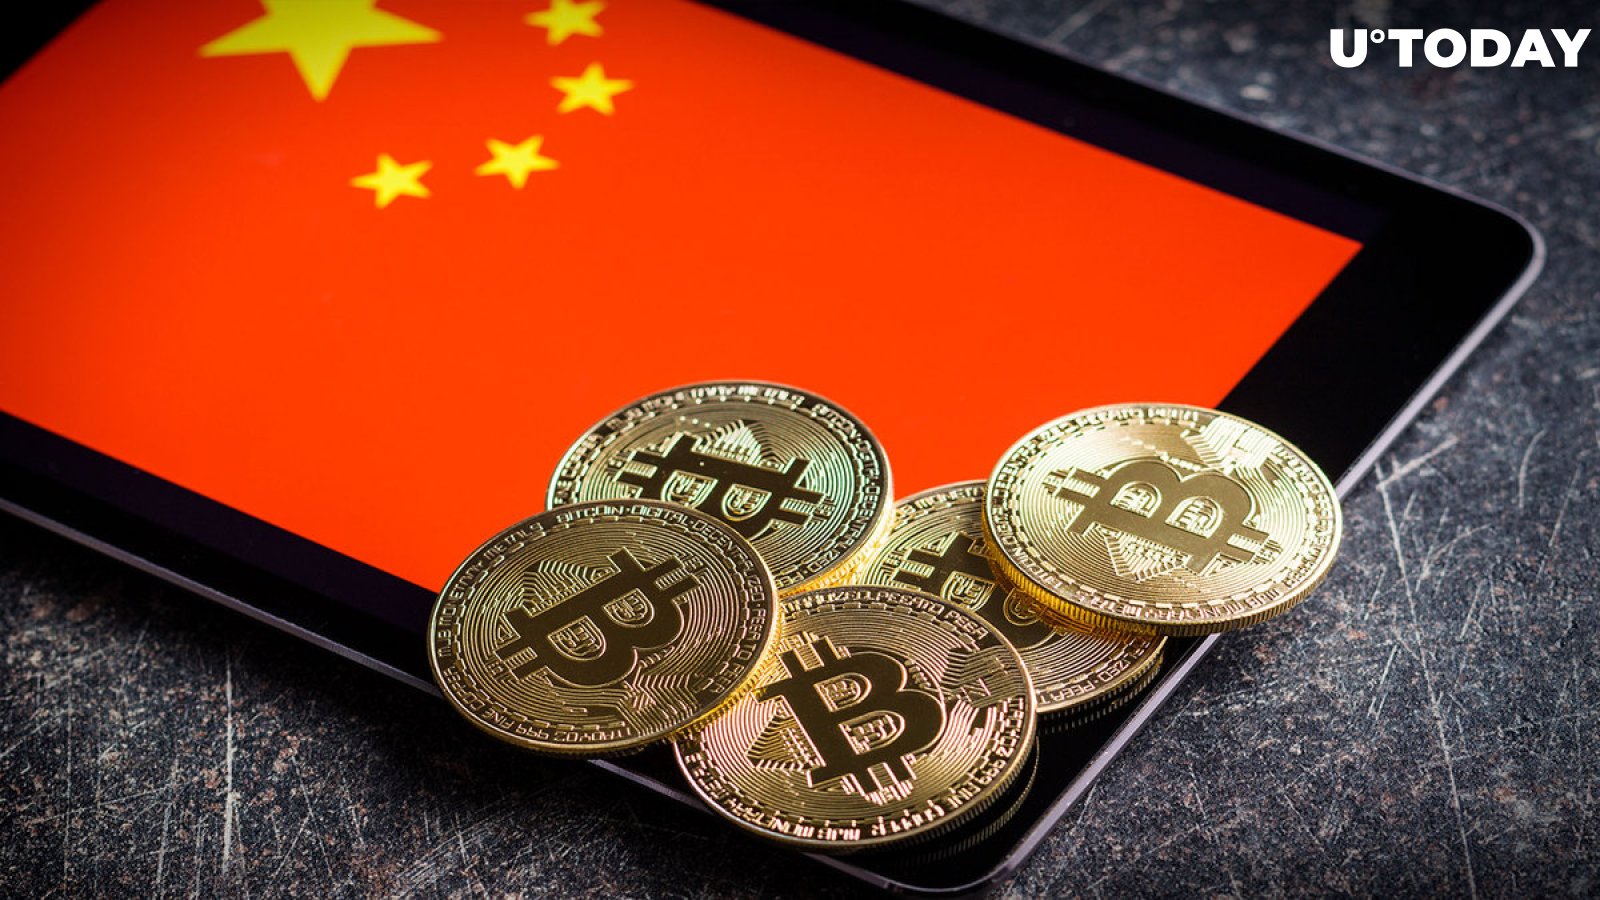 Bitcoin Might Skyrocket 100% as China Cuts Interest Rate